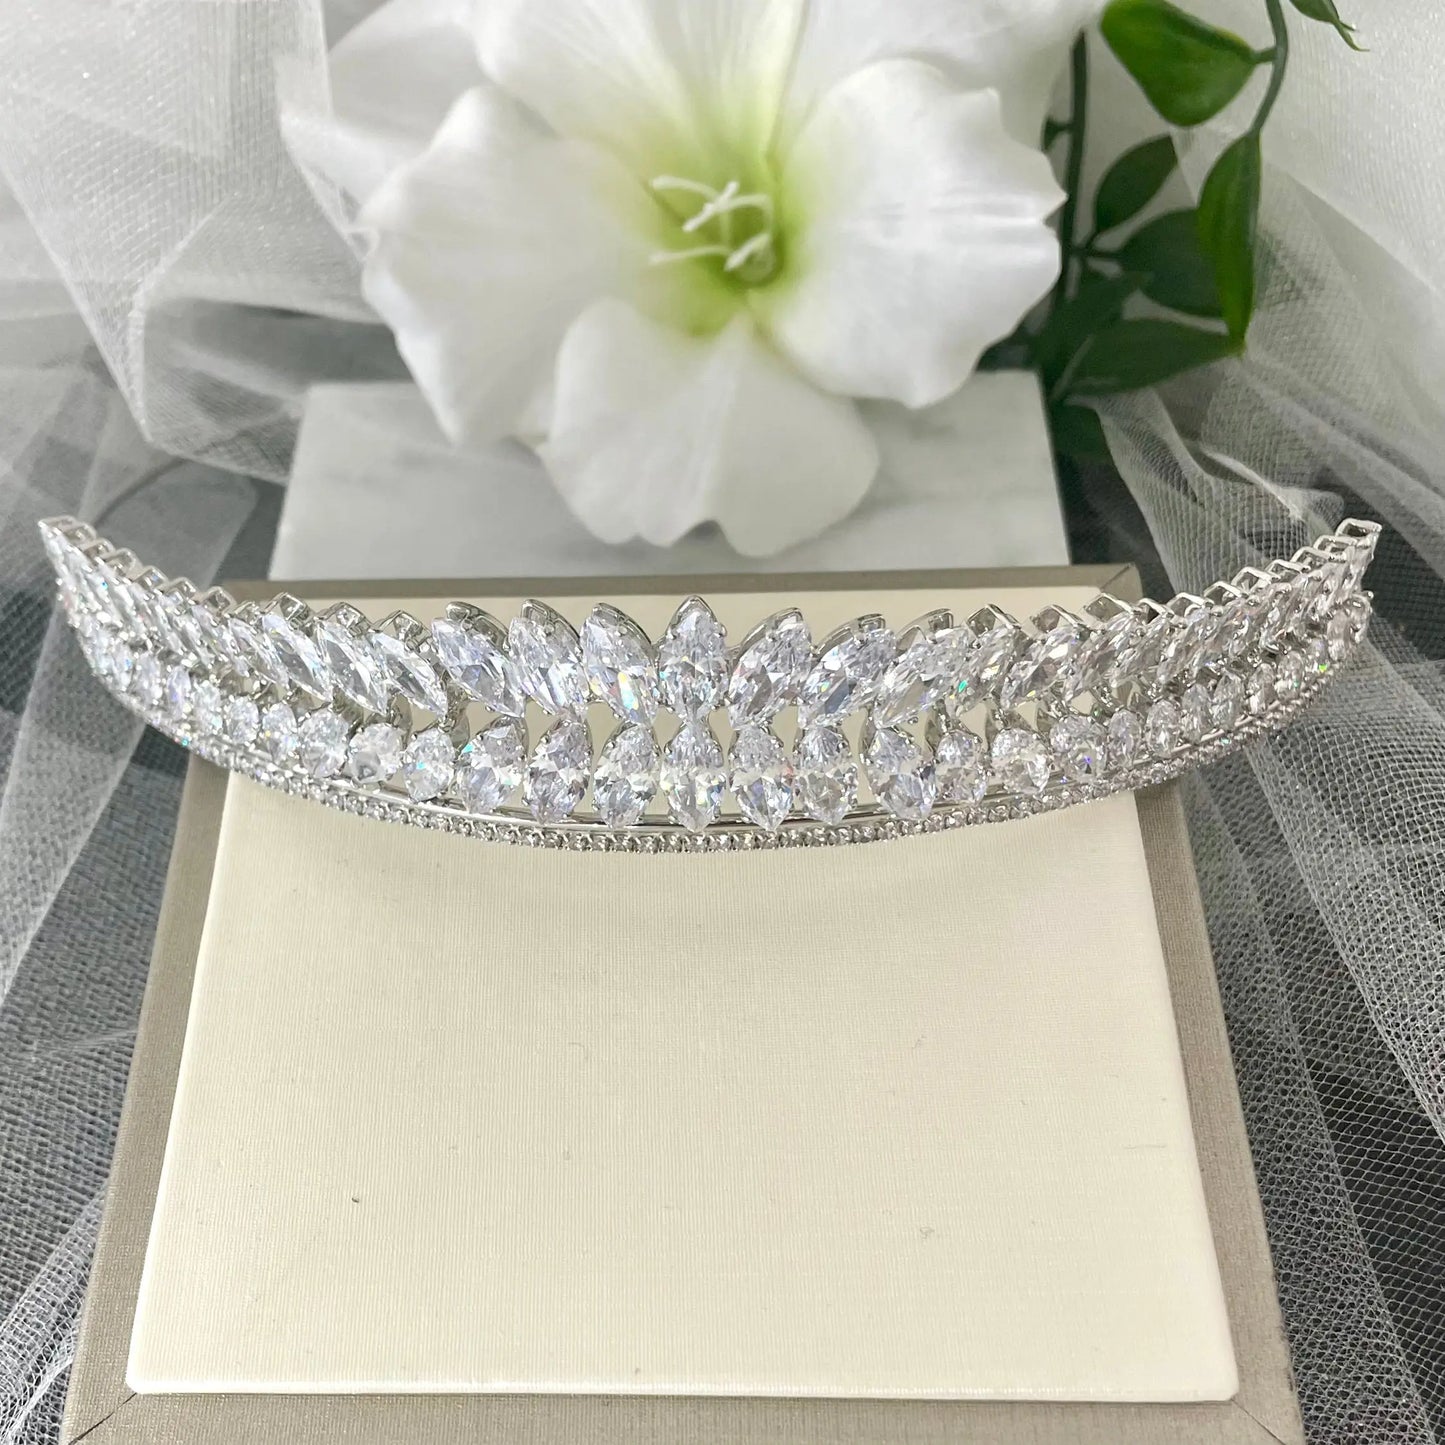 Pari Bridal Wedding Tiara in Silver, featuring stunning CZ crystals and intricate diamanté detail, crafted in Melbourne for brides seeking elegance and sophistication.